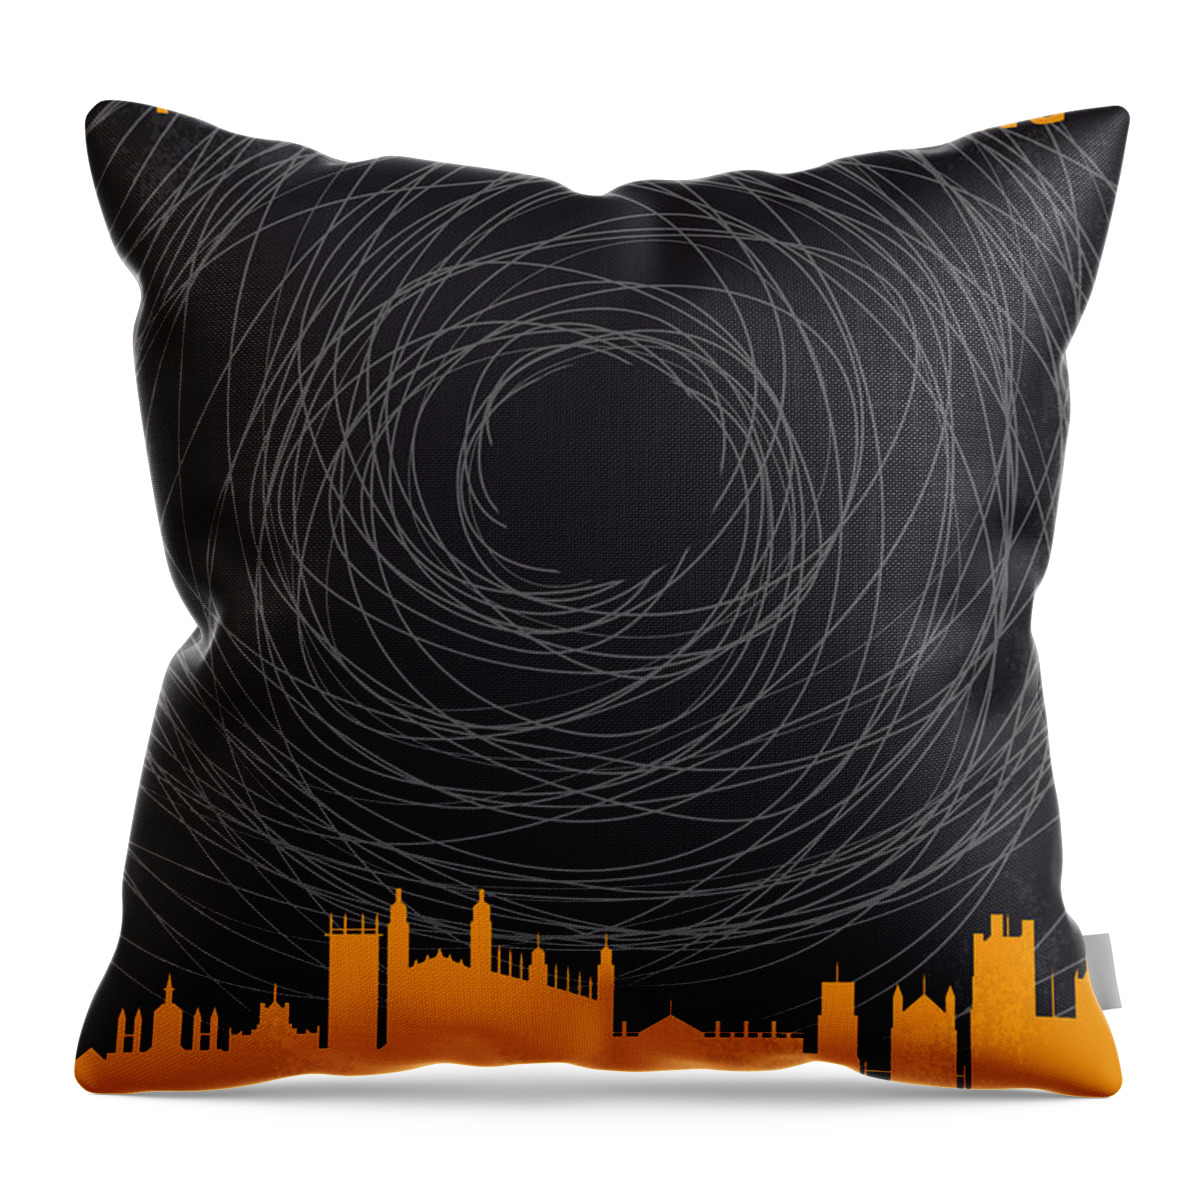 The Throw Pillow featuring the digital art No568 My The theory of everything minimal movie poster by Chungkong Art